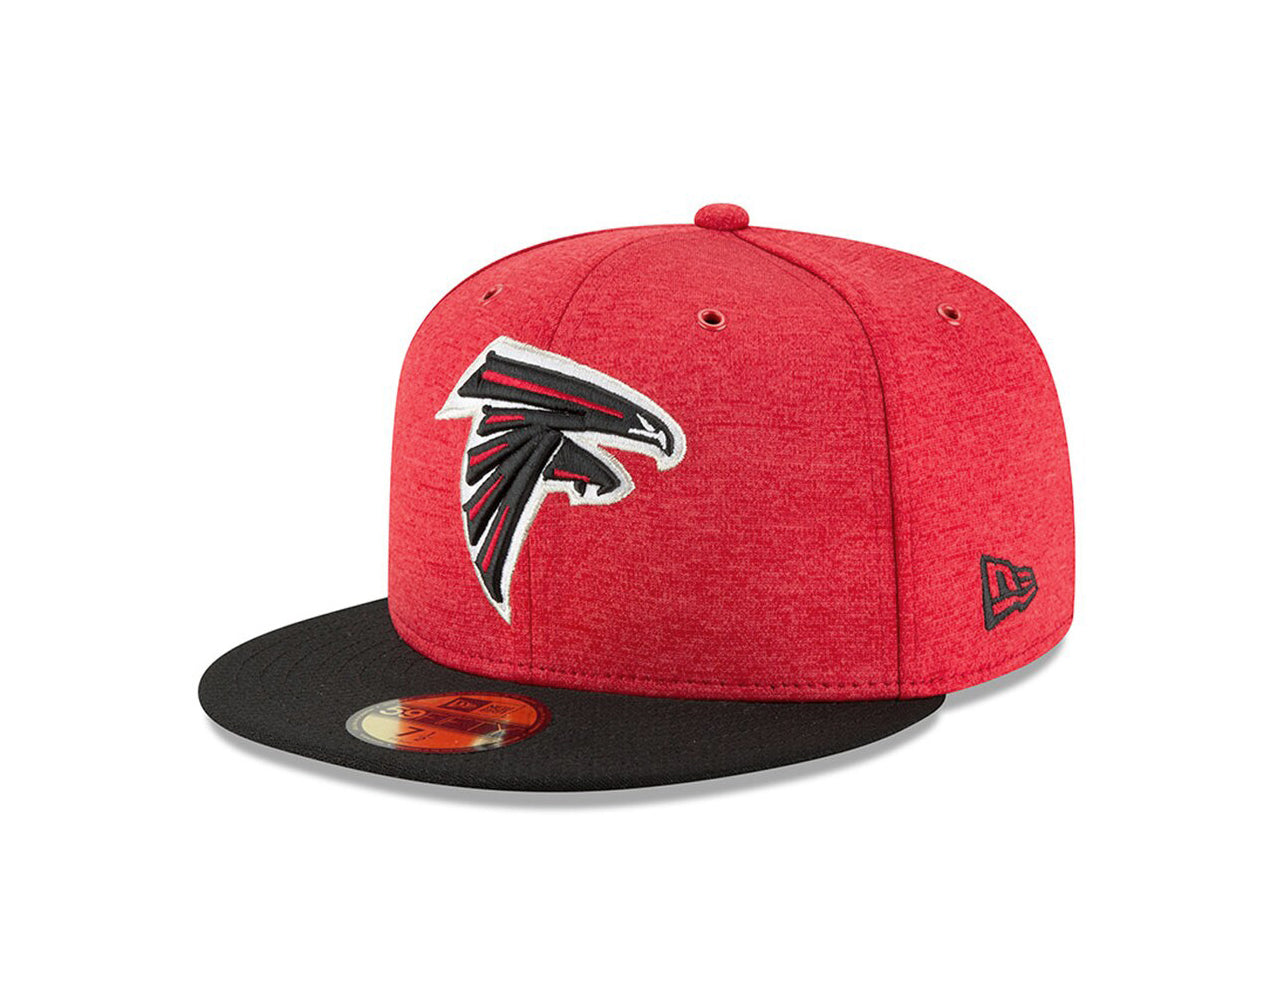 New Era 59Fifty Men's Hat Atlanta Falcons Sideline Red Fitted Cap